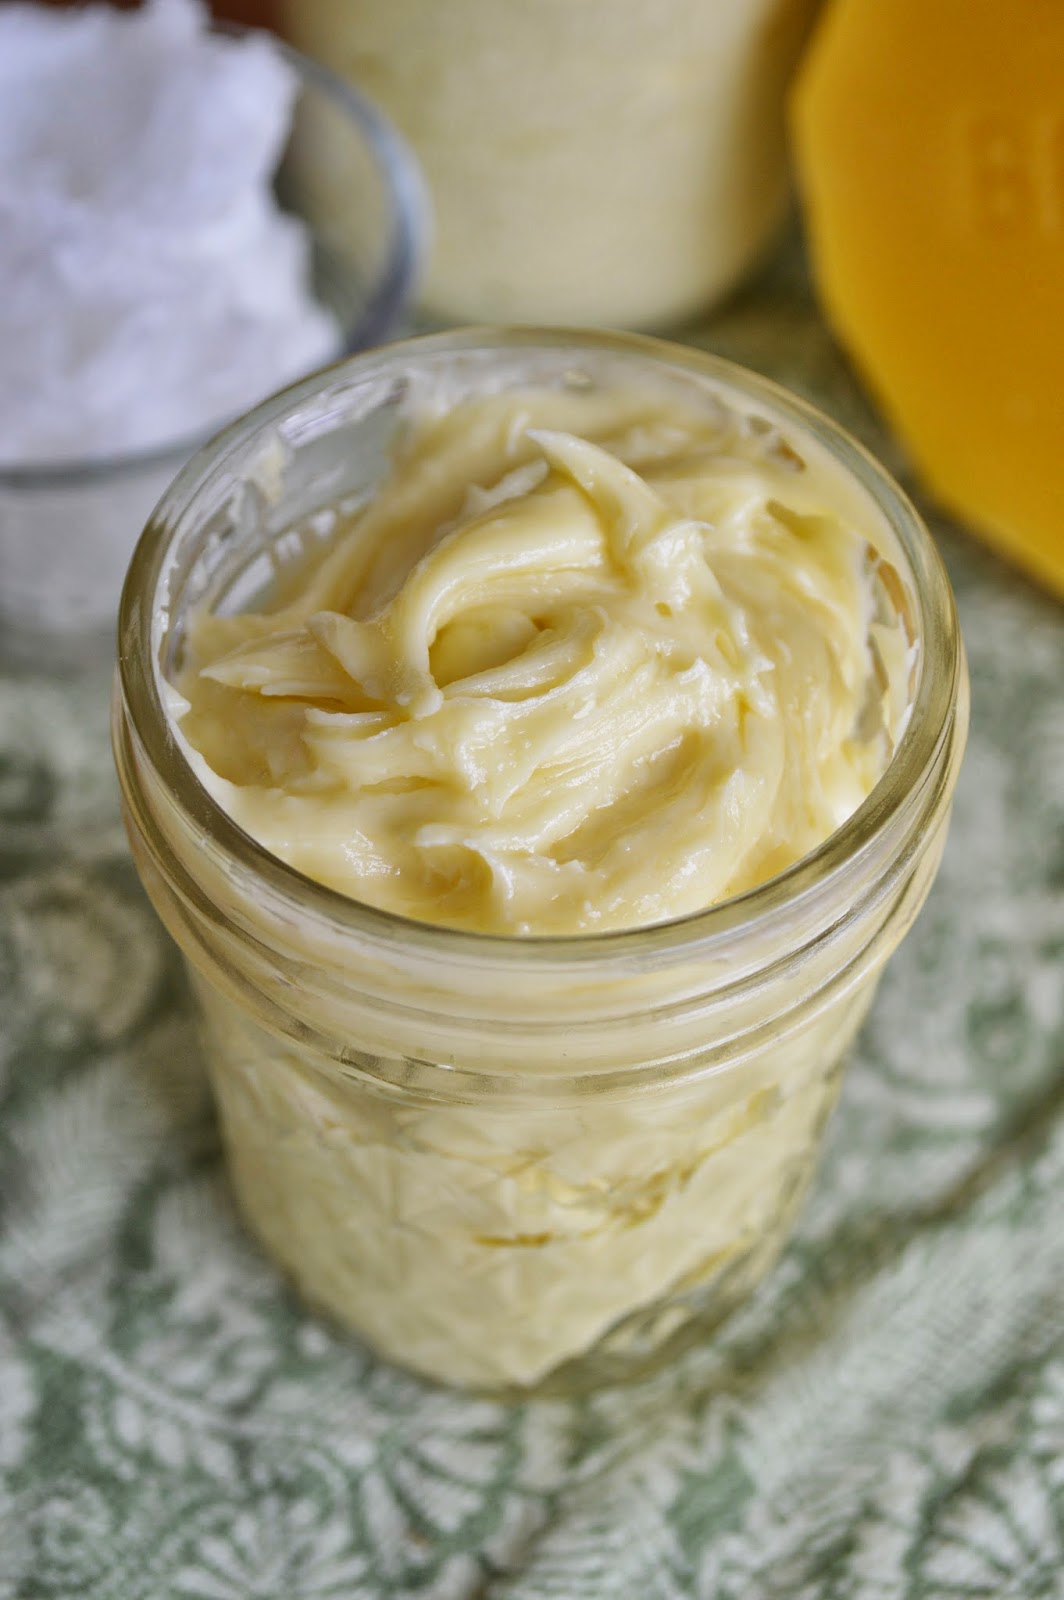 Homemade Whipped Body Butter | The Greeneberger Nutrition